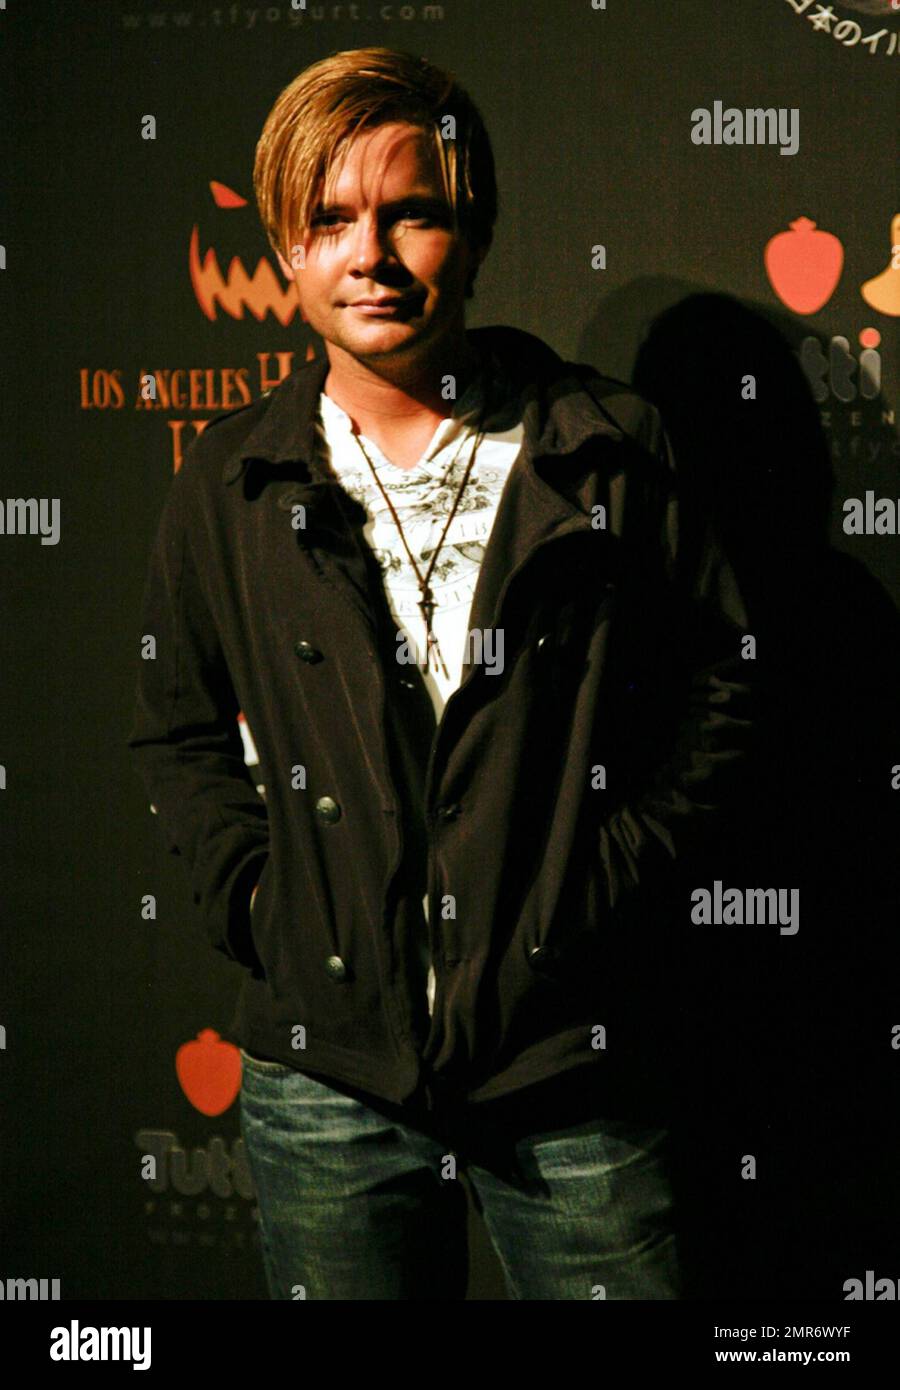 Anthony Fitzgerald at the VIP Premiere night of the 2nd Annual Los Angeles Haunted Hayride at the new location of Griffith Park's Old Zoo. The event is a month-long attraction featuring the Haunted Hayride, Haunted Maze and a full-size Carnival of Souls packed with rides and games. Los Angeles, CA. 10/10/10. Stock Photo